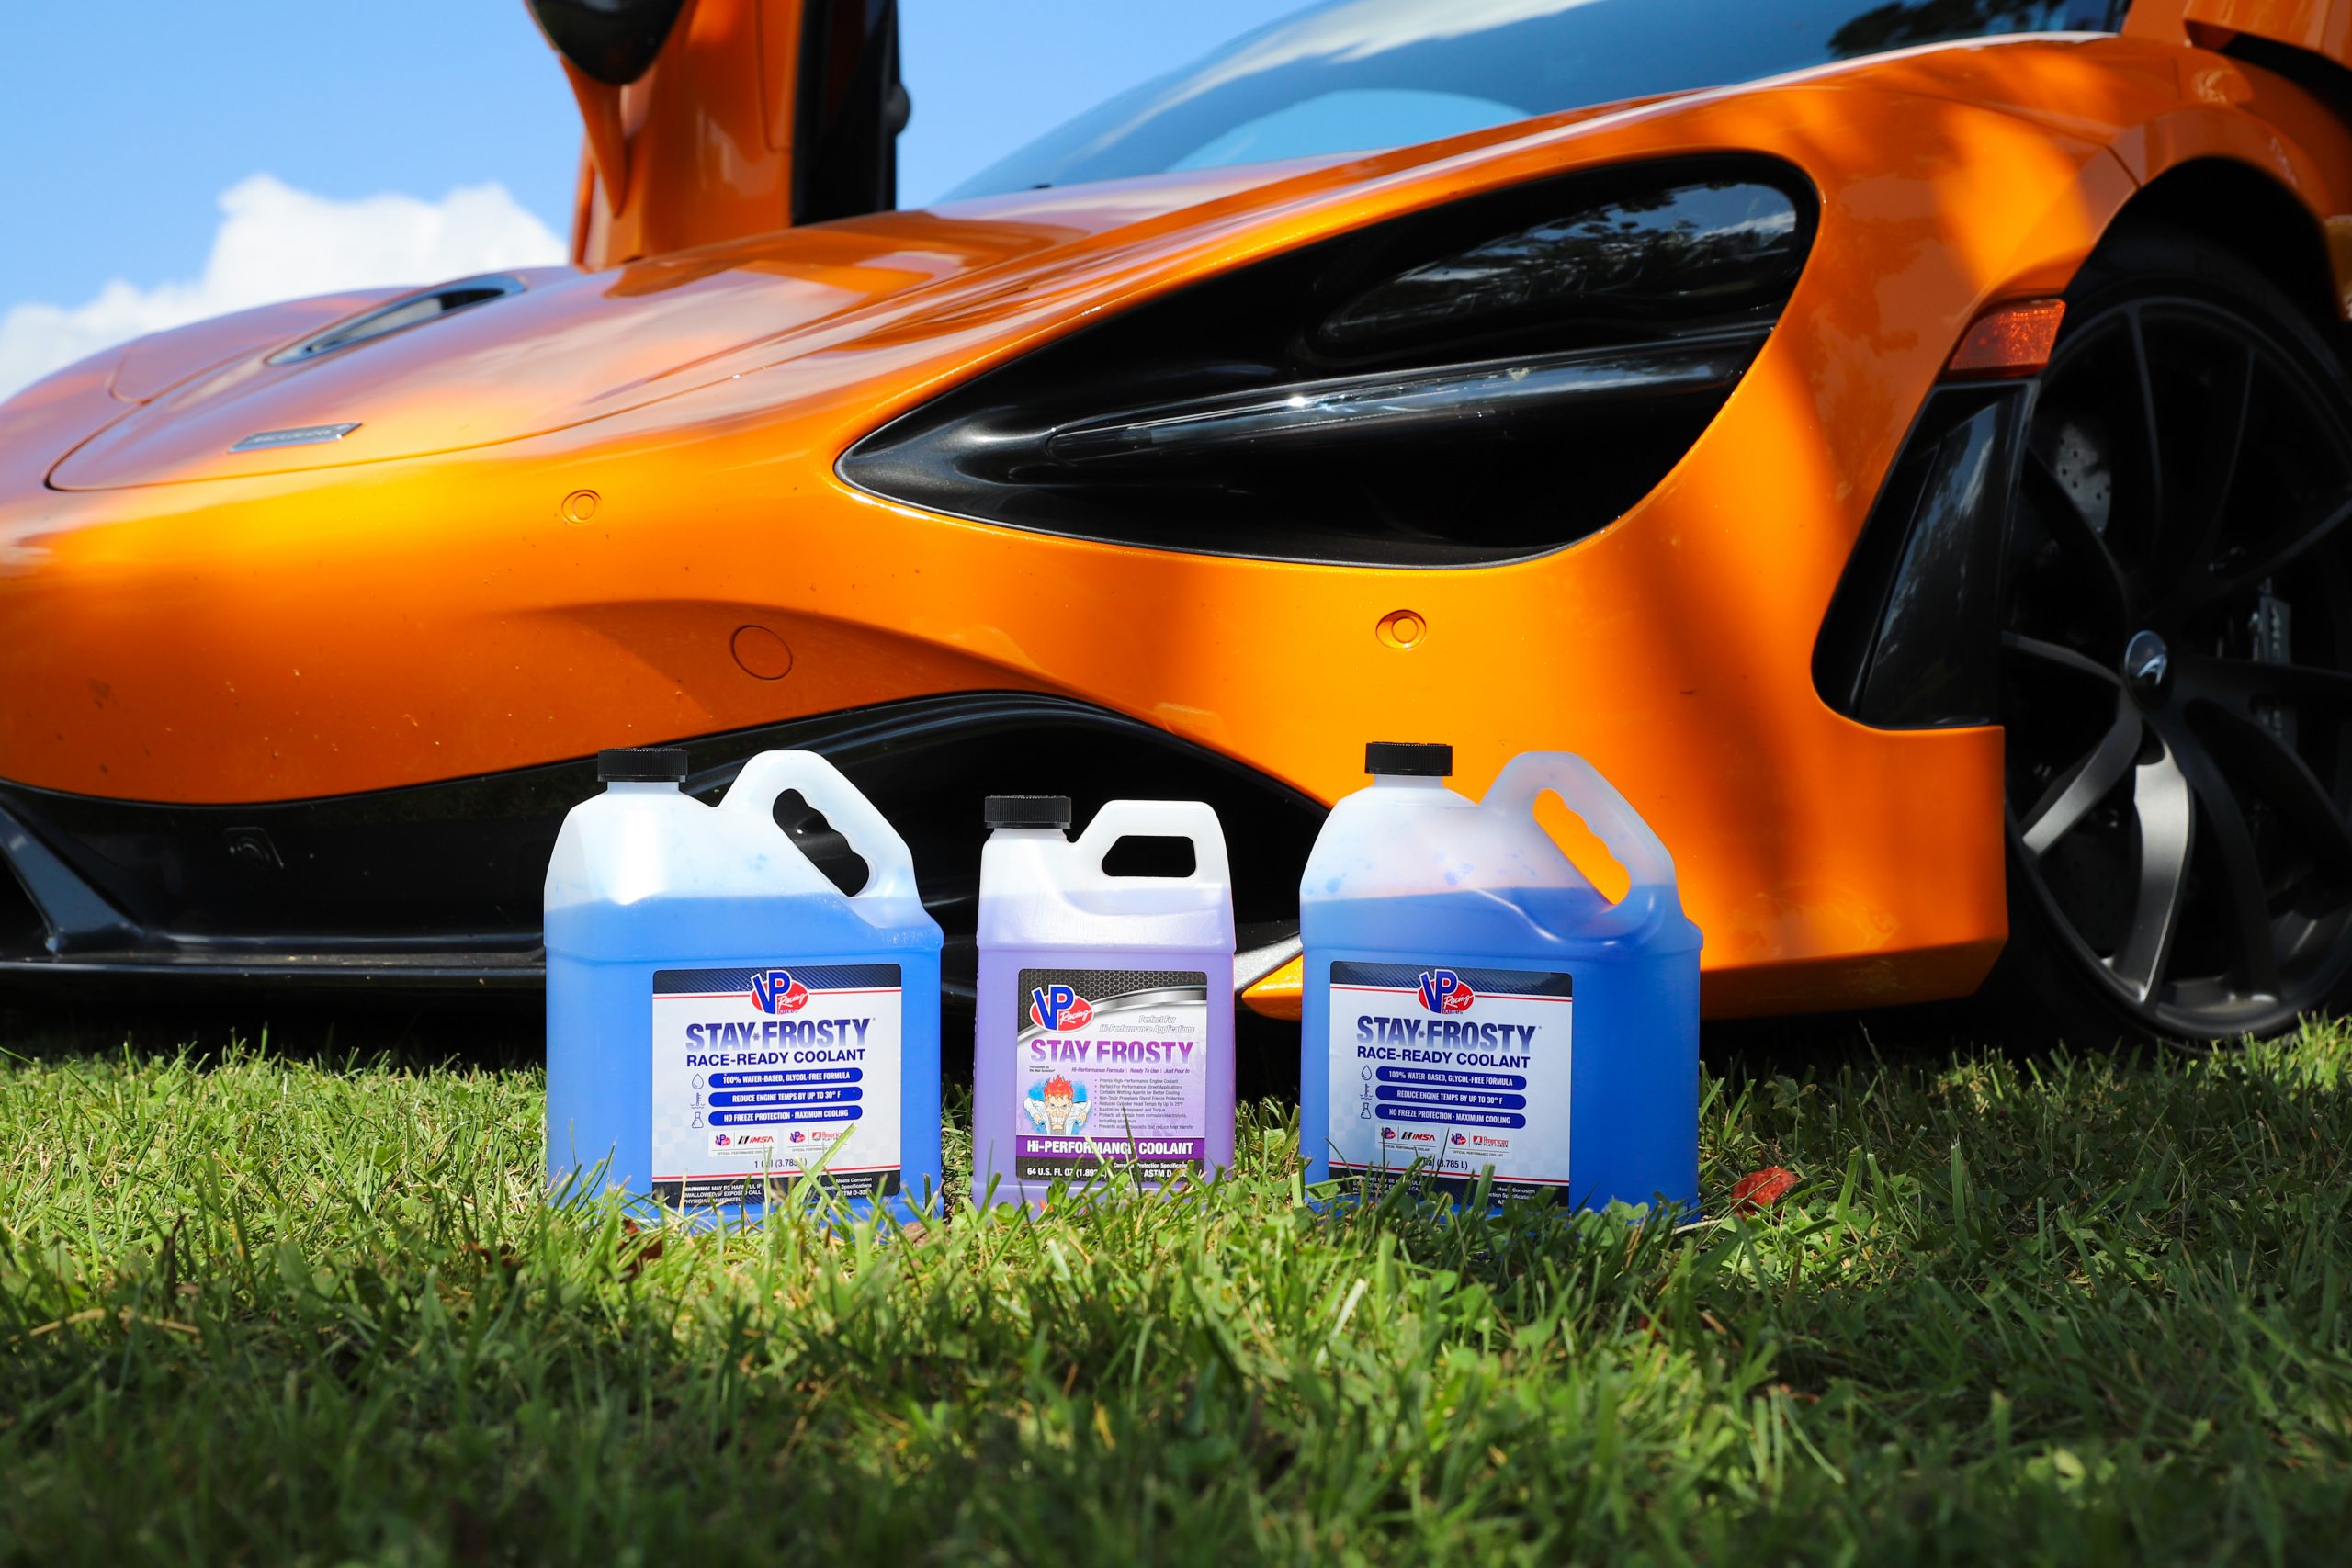 two bottles of VP Stay Frosty Race-Ready racing engine coolant and one bottle of stay frosty hi-performance engine coolant pictured in front of a sports car. Stay Frosty controls engine heat, which is factor that can have an effect on your vehicle engine control unit. It's 3 wetting agents and 100% reverse osmosis water formulation make it the best engine coolant for race cars and high-performance vehicles